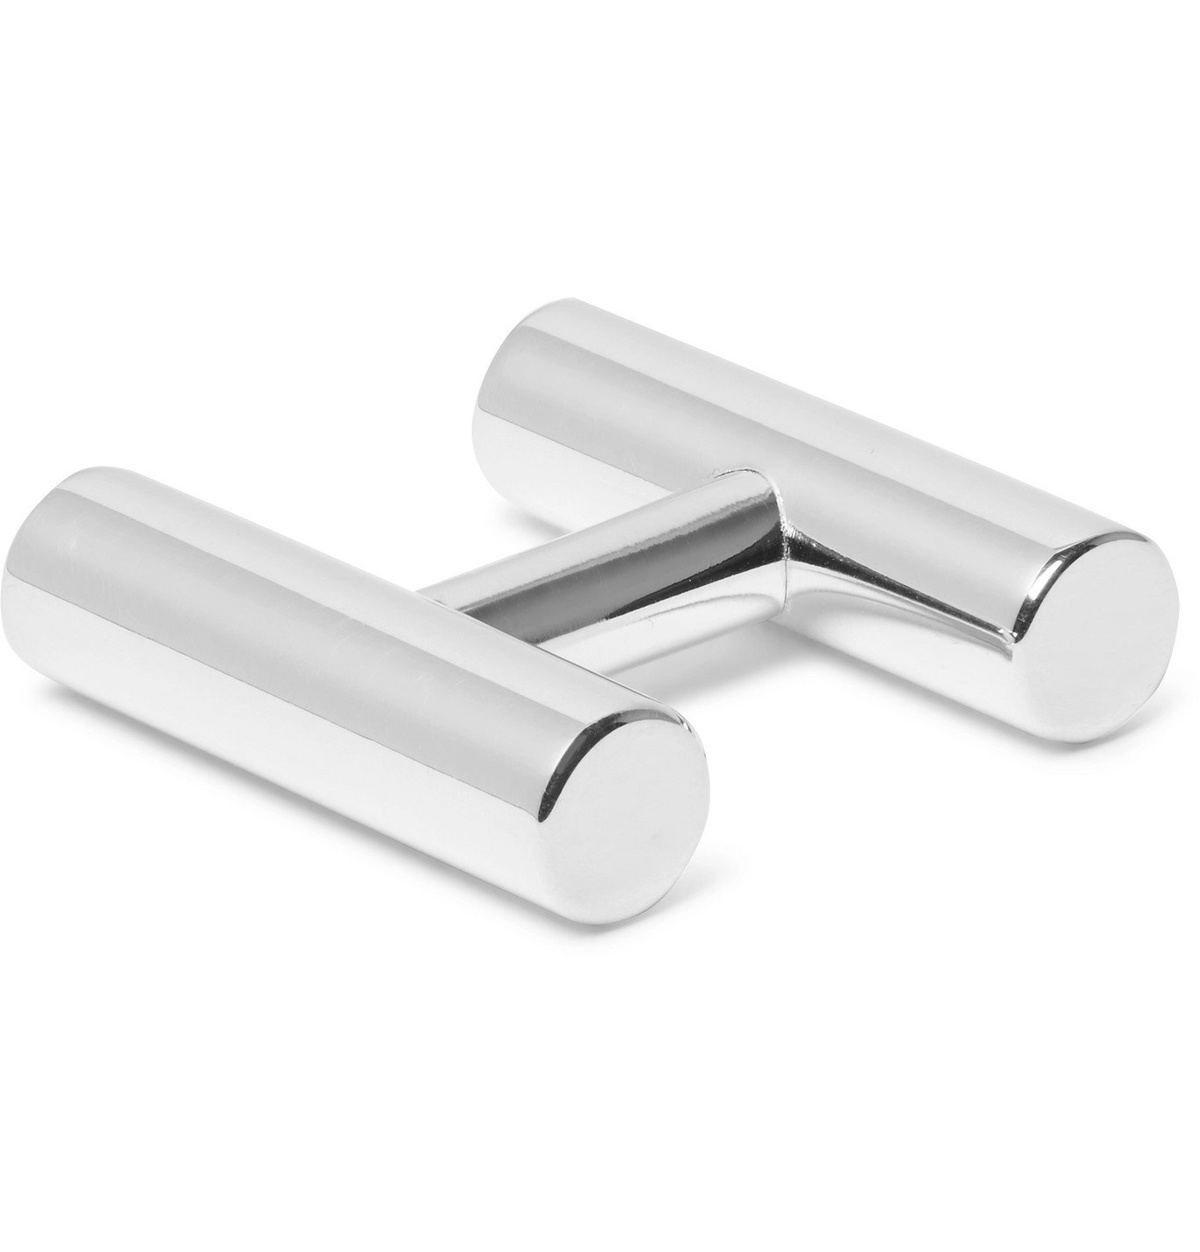 Alice Made This - Kitson Silver-Plated Cufflinks - Silver Alice